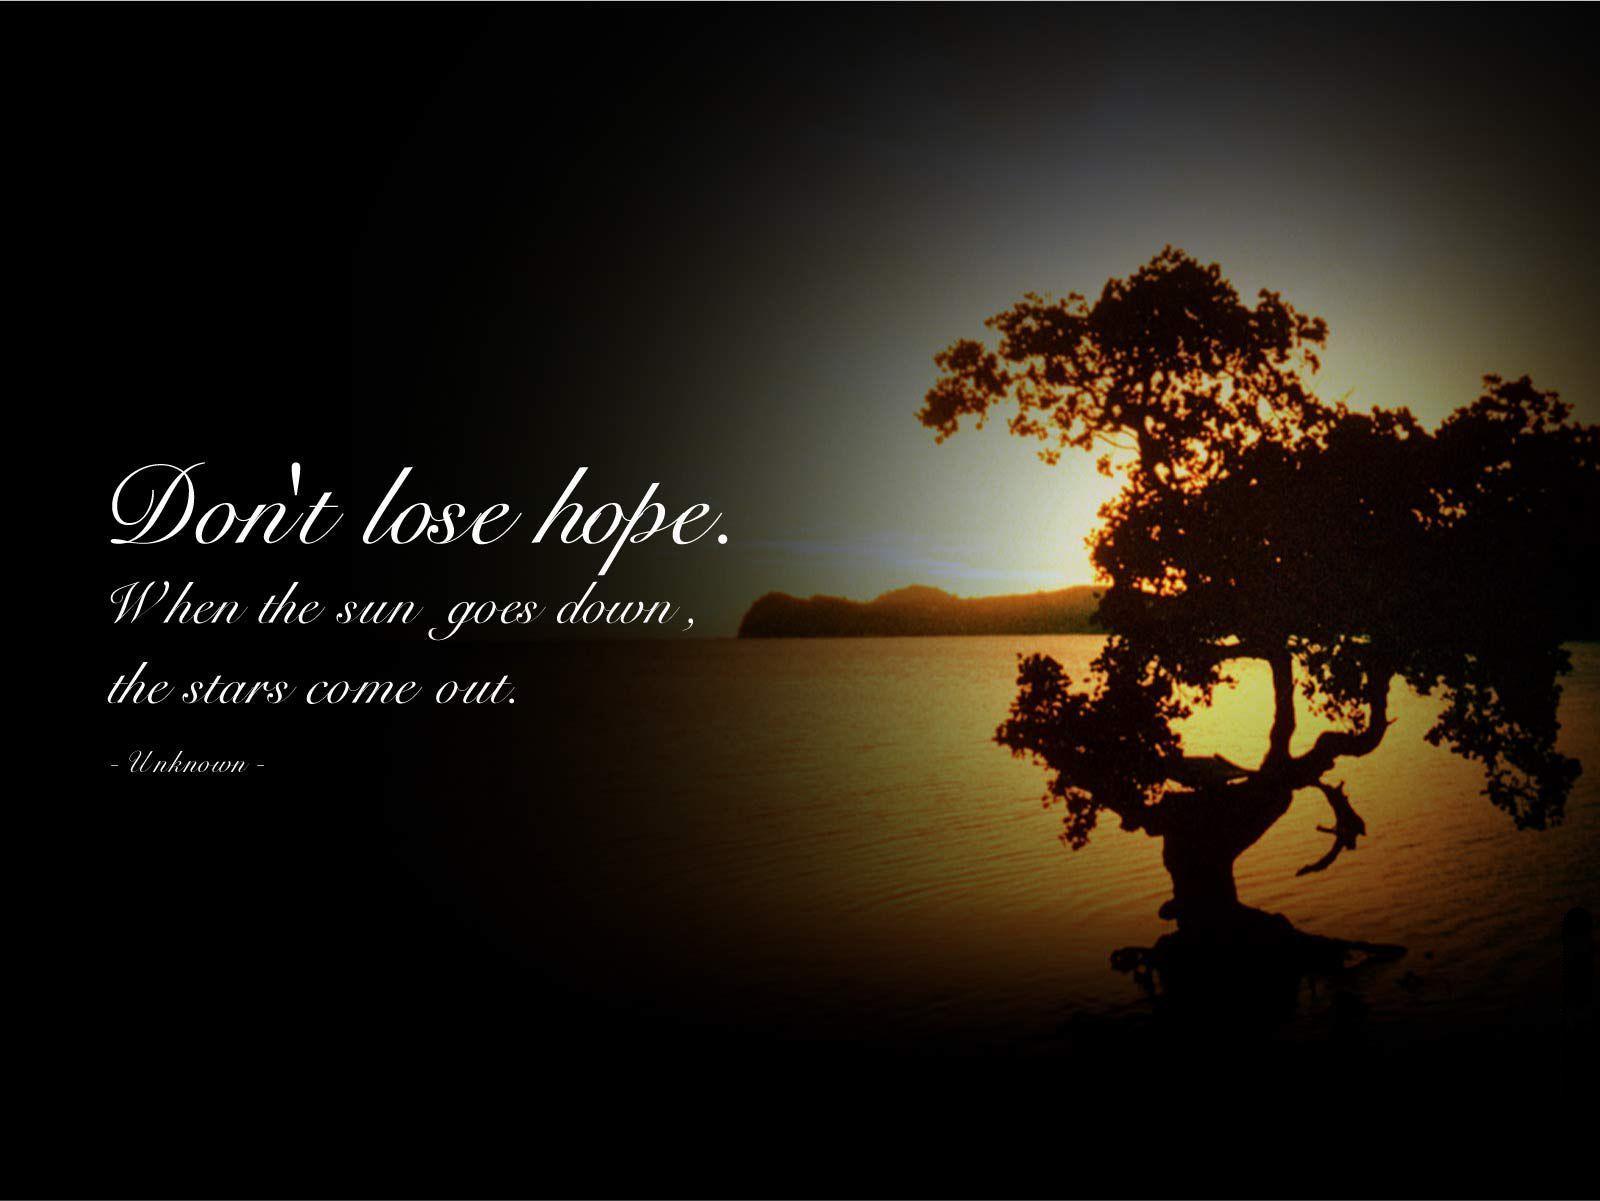 Wallpapers For > Inspirational Quotes Wallpapers Widescreen